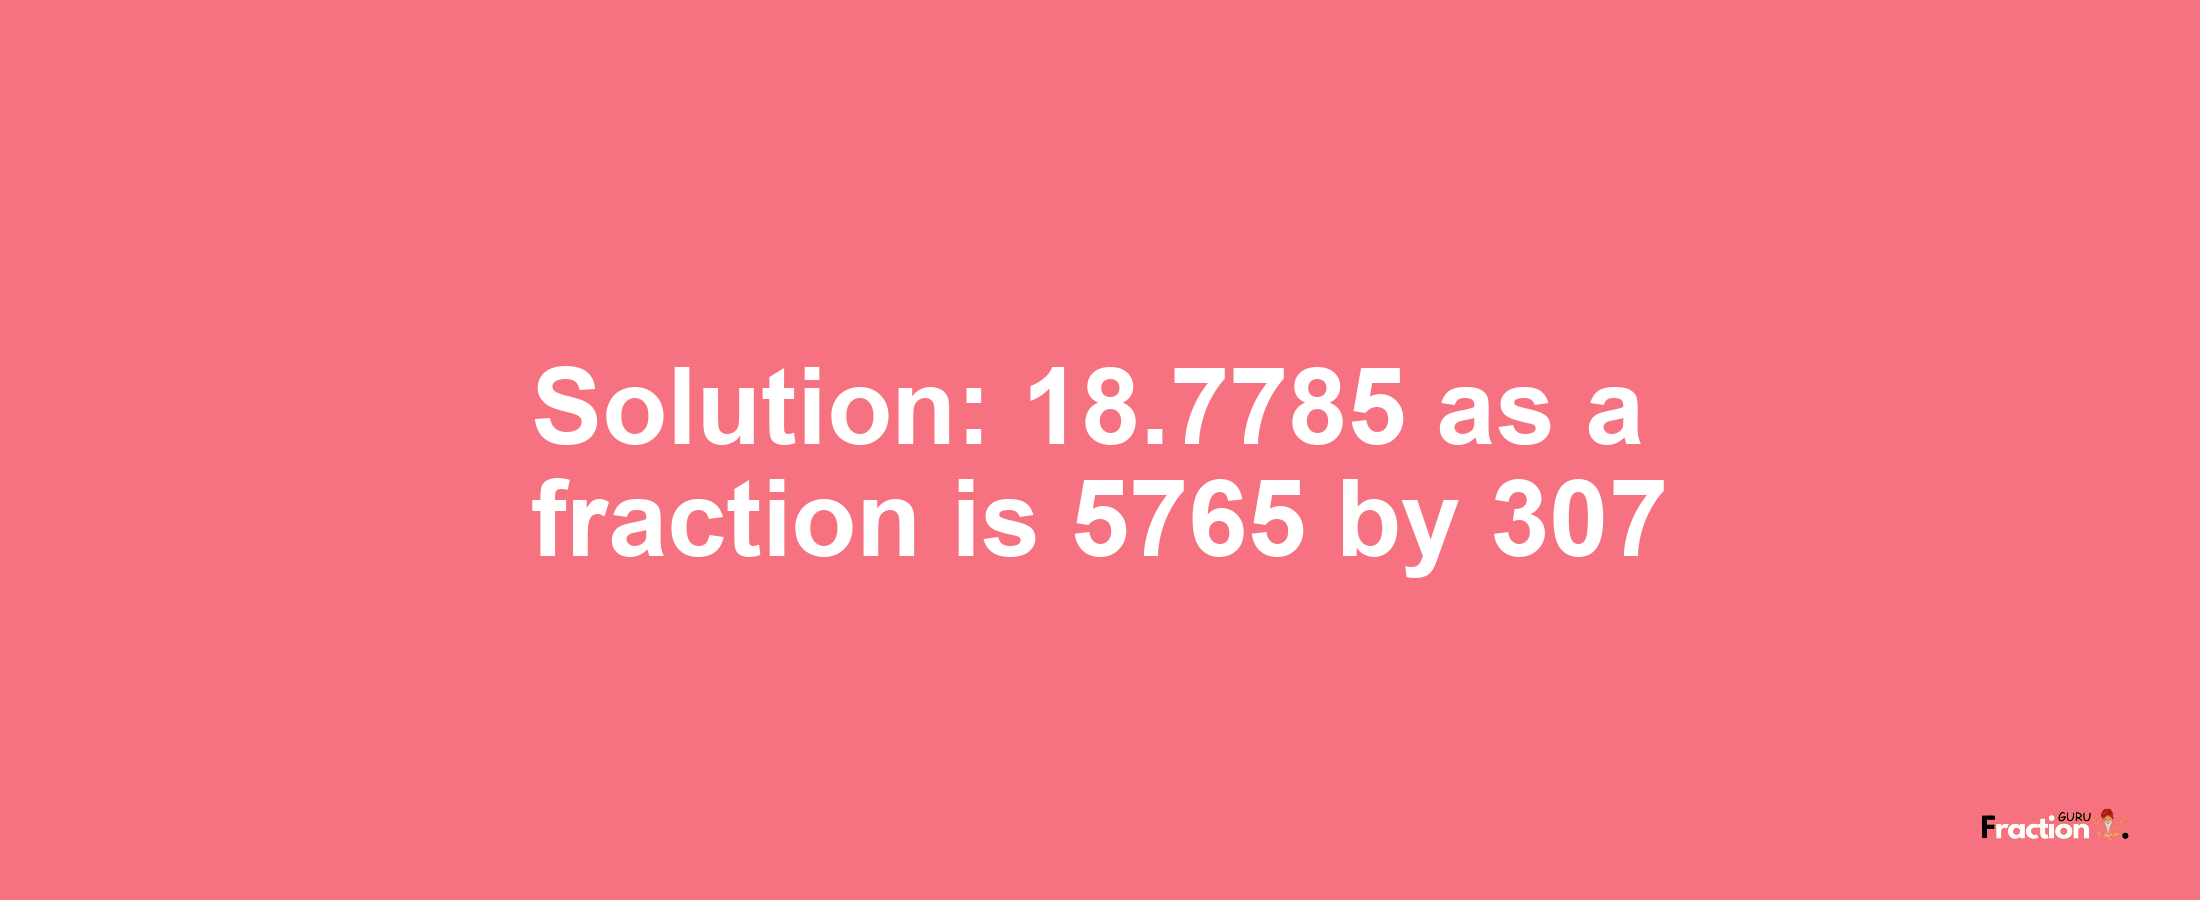 Solution:18.7785 as a fraction is 5765/307